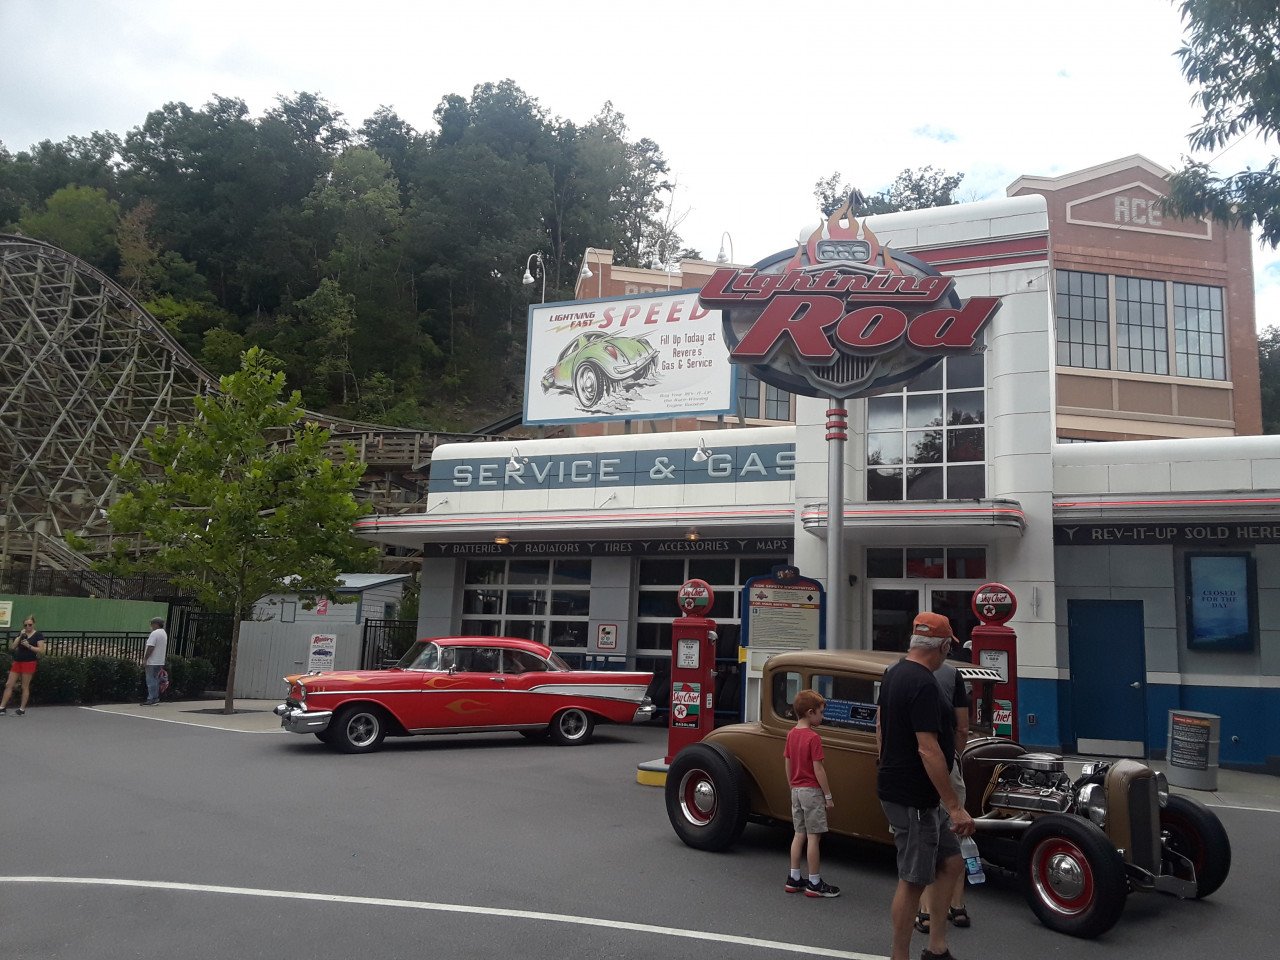 Tag29 : Great Smoky Mountains und Dollywood